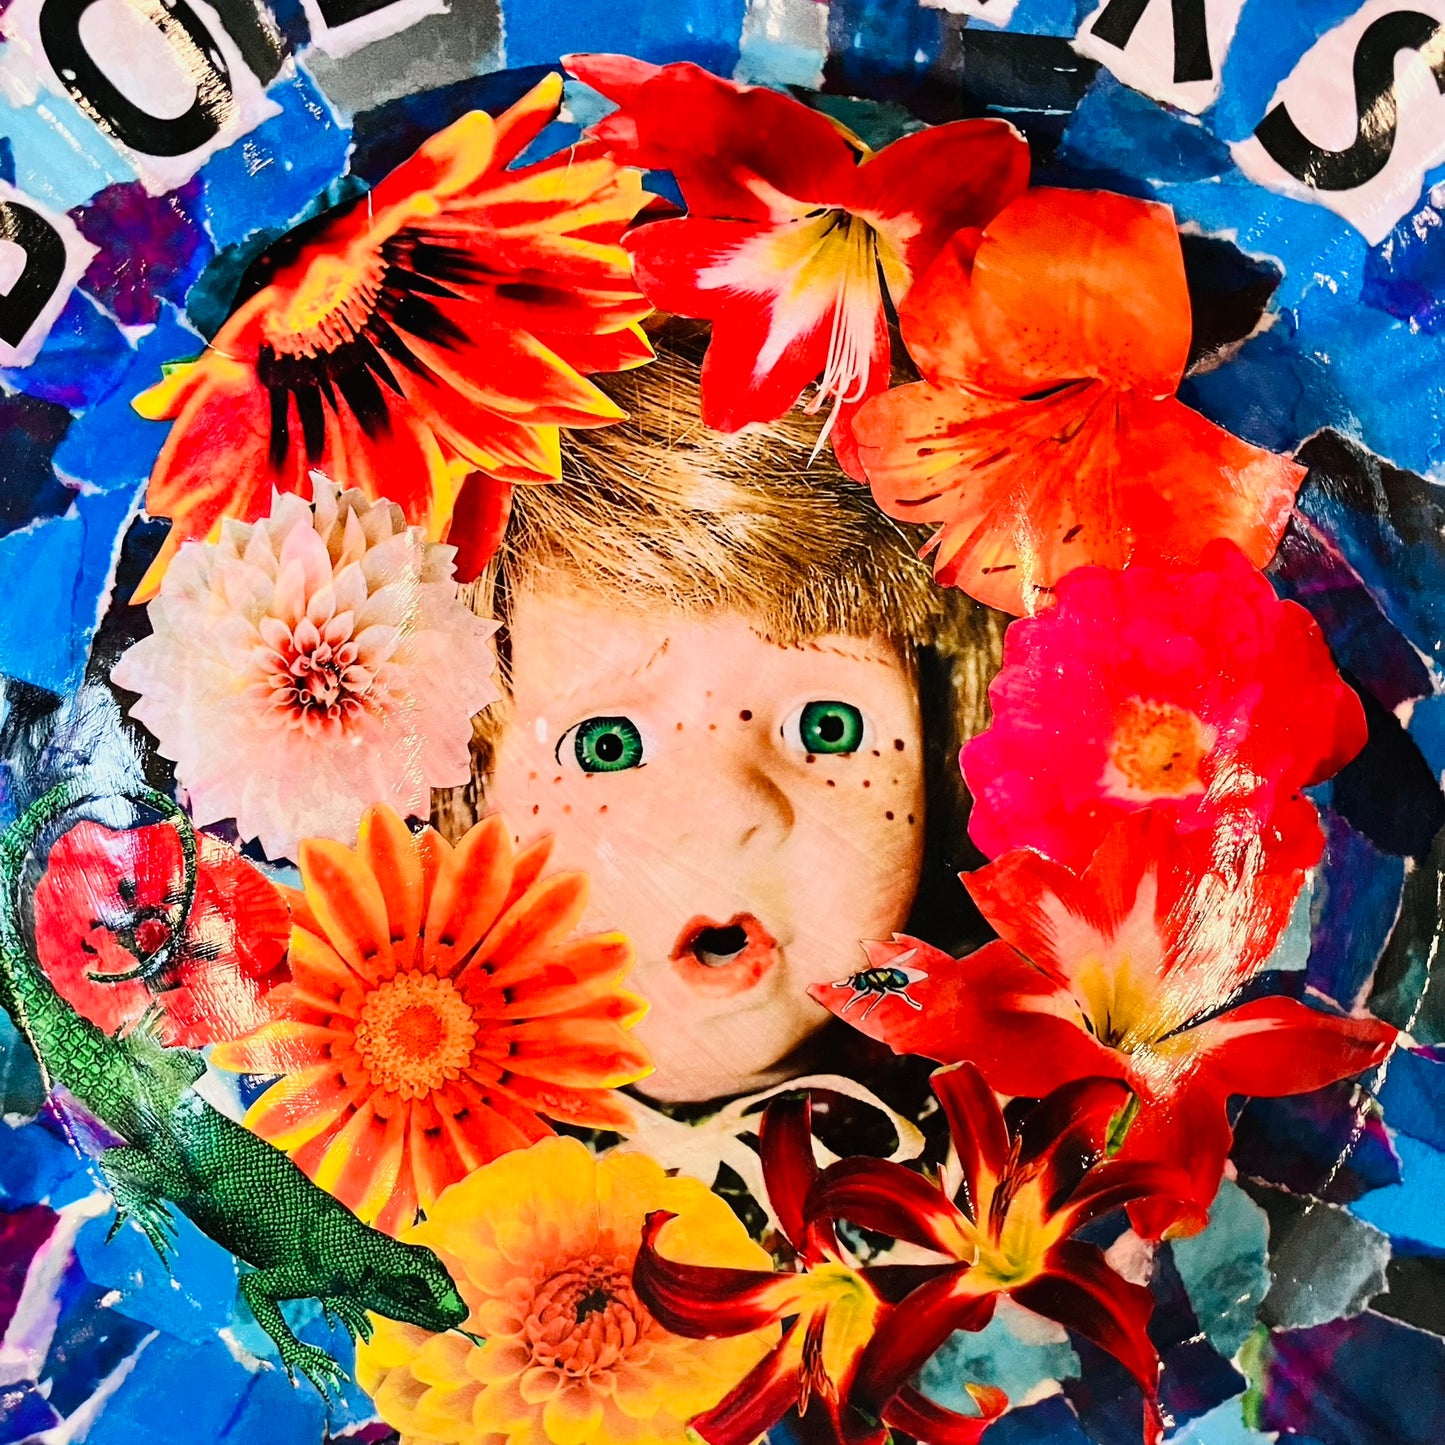 "Bollocks" Wall Plate by House of Frisson, featuring a collage of a vintage male doll surrounded by flowers and a lizard, on a blue background. Closeup details showing the male doll's face among flowers.